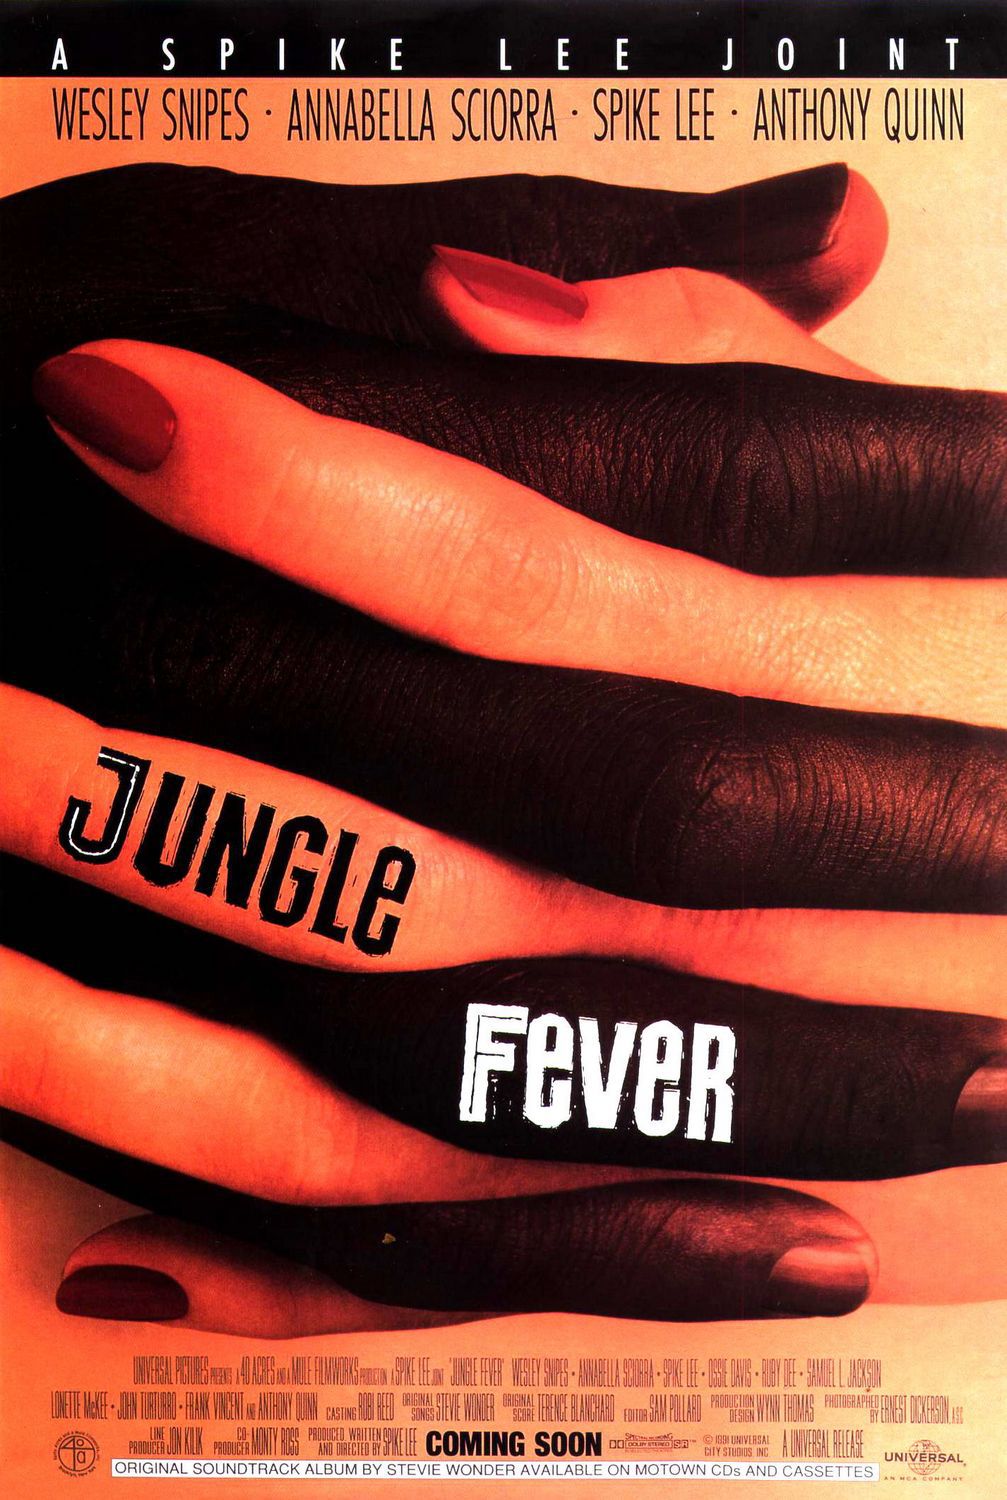 david sydney recommends Girls With Jungle Fever